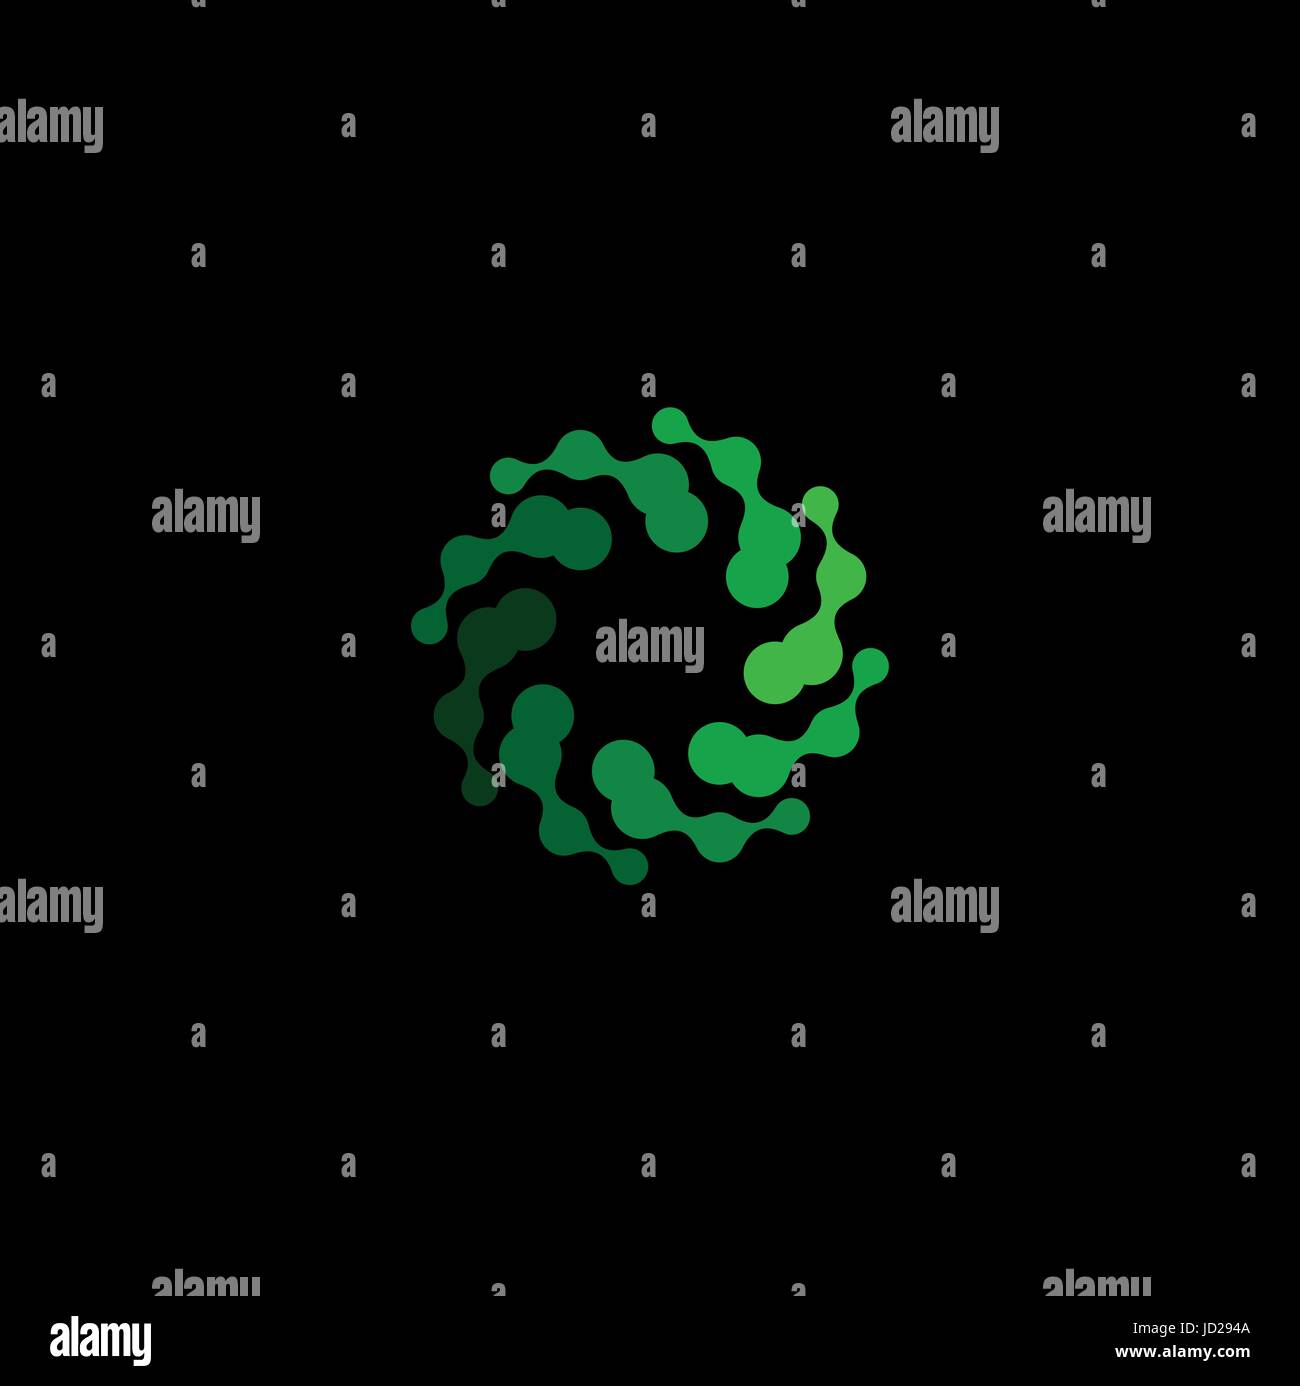 Isolated abstract green color round shape logo on black background, simple flat swirl logotype vector illustration. Stock Vector